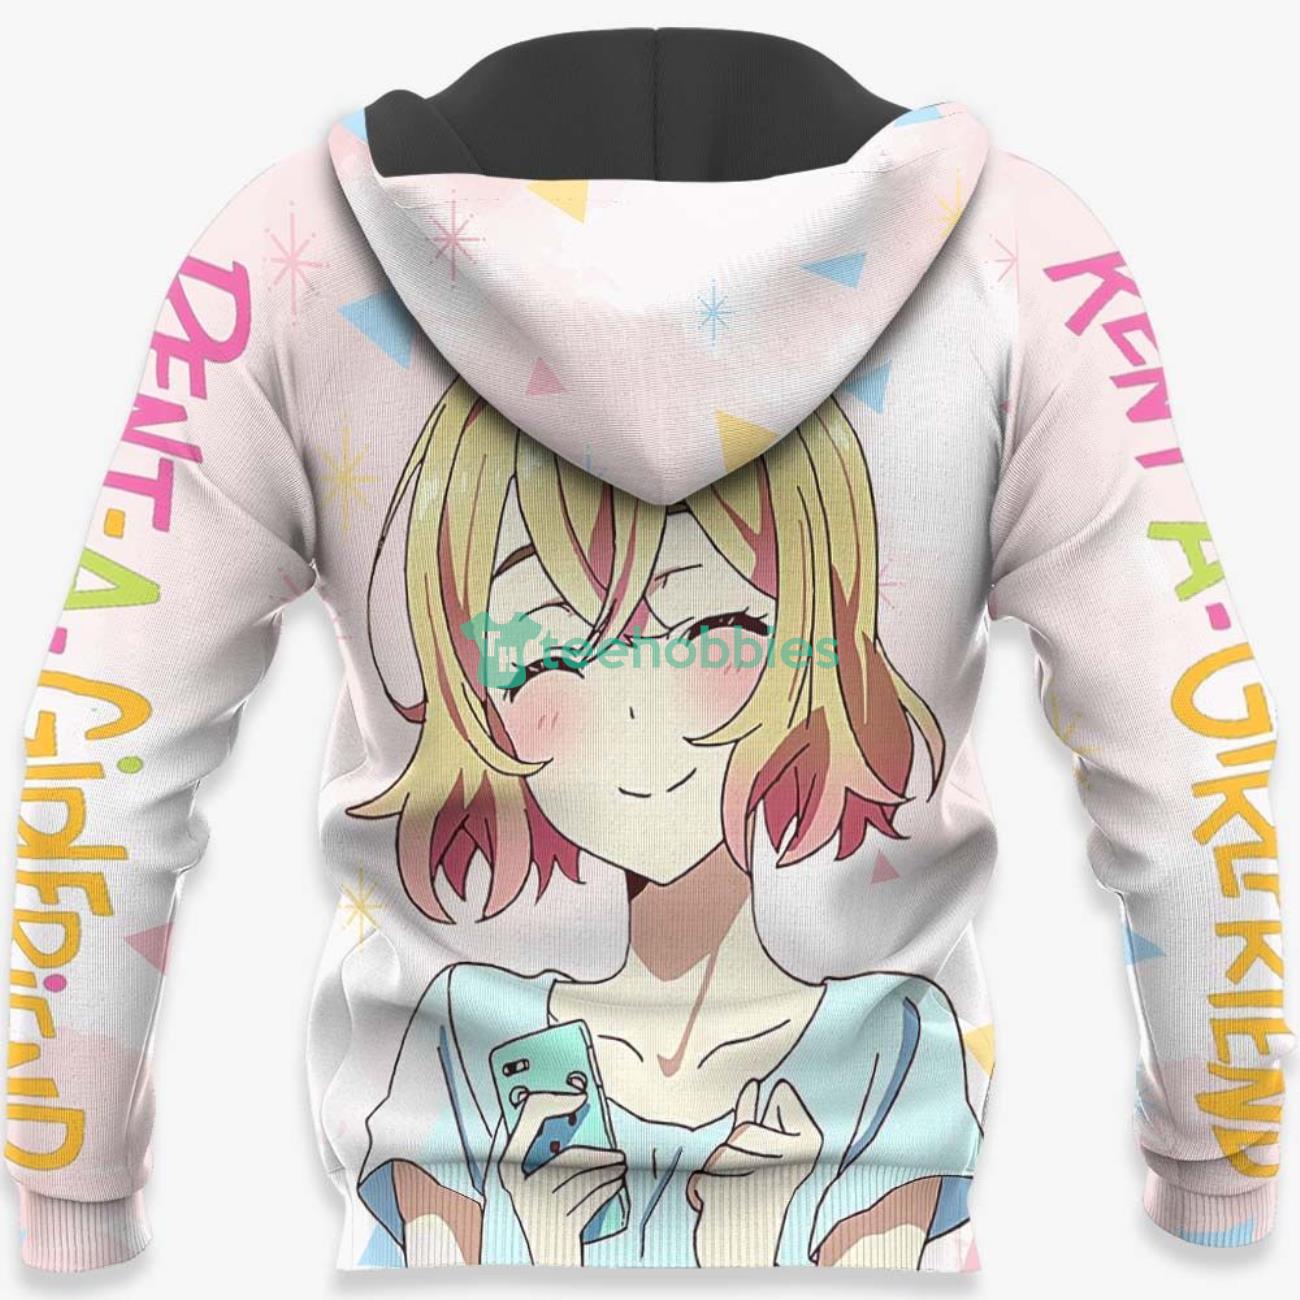 Rent A Girlfriend Mami Nanami All Over Printed 3D Shirt Anime Fans Product Photo 5 Product photo 2